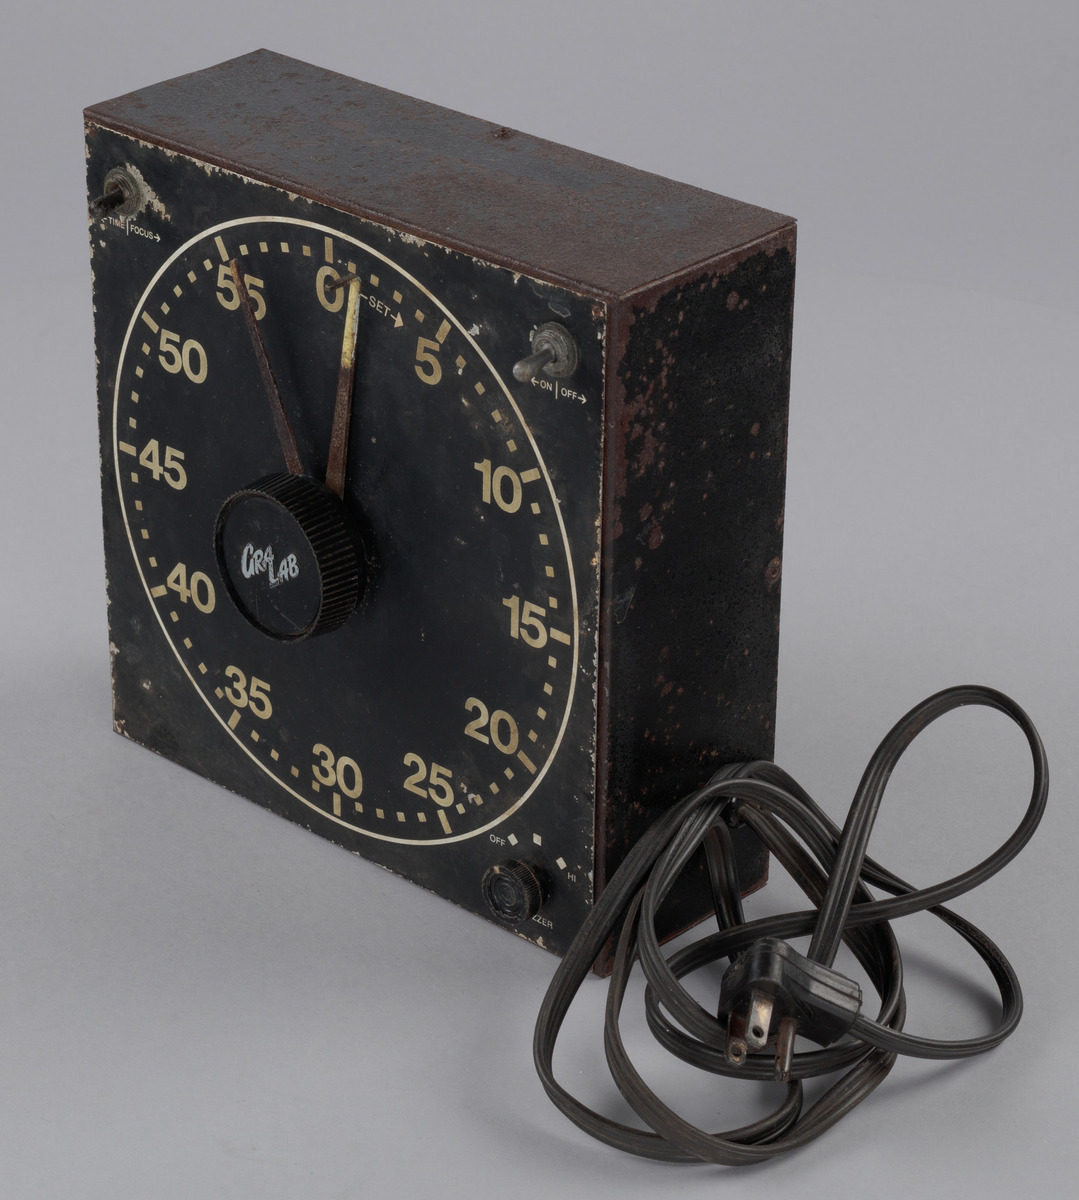 Darkroom timer from the studio of H.C. Anderson nmaahc.si.edu/object/nmaahc_…